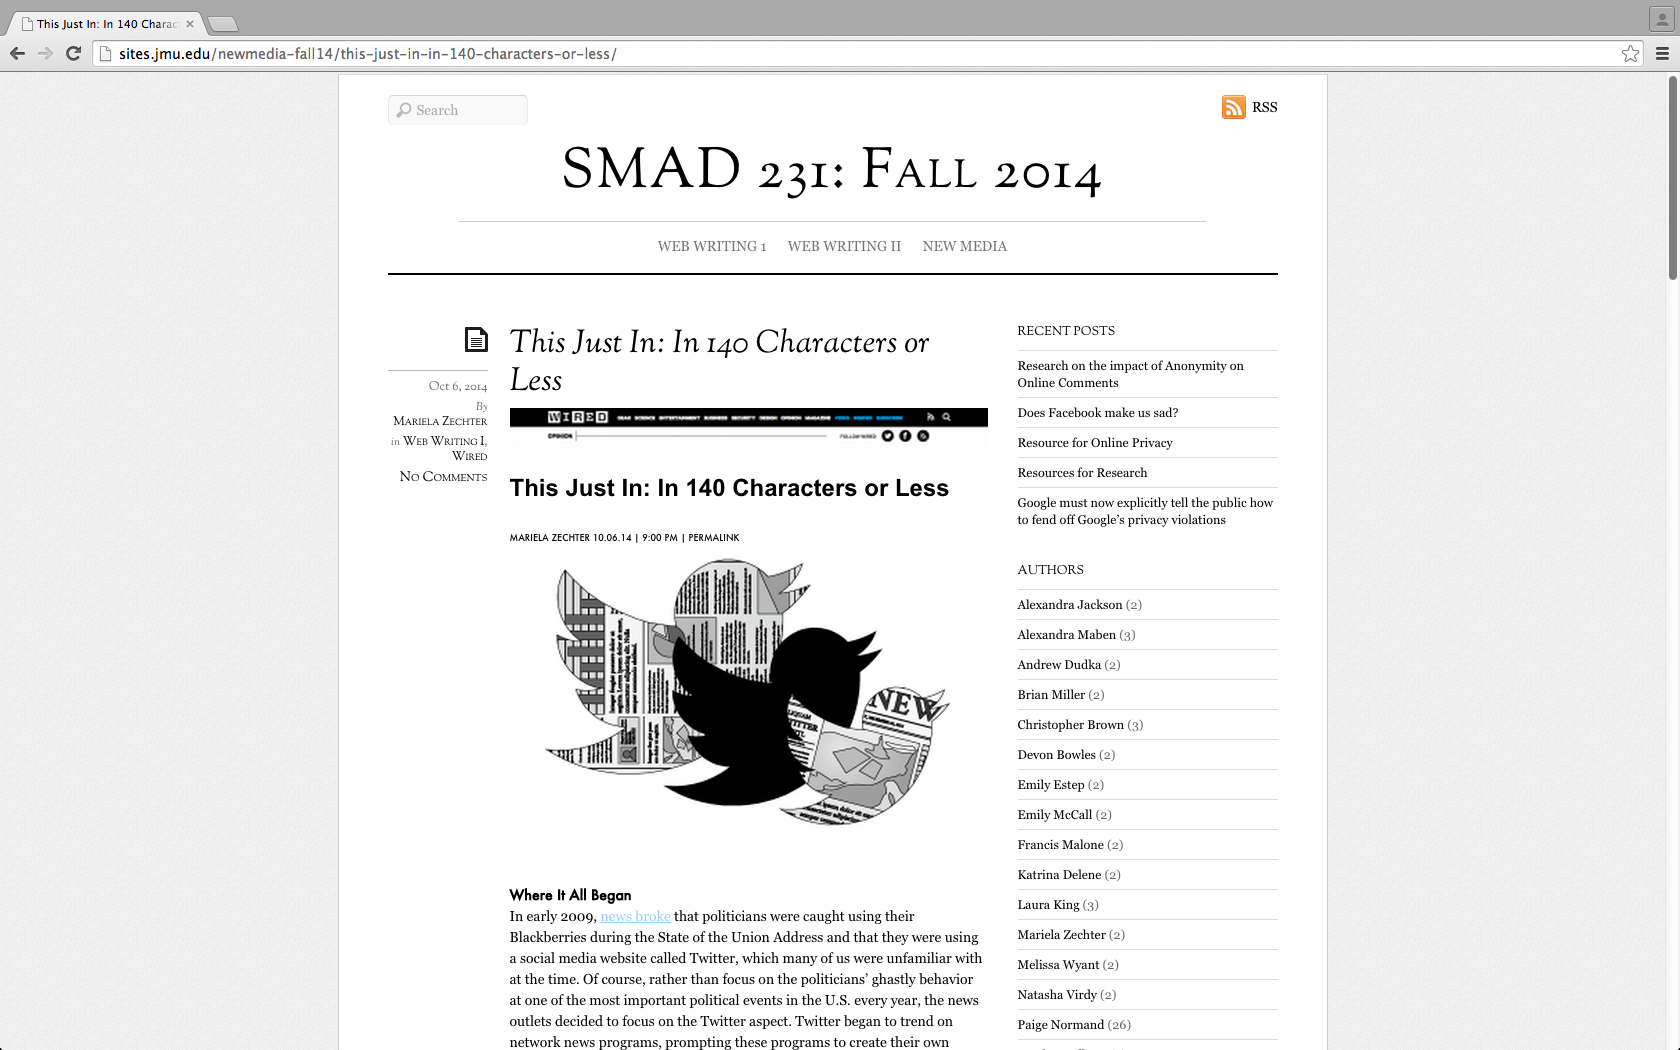 "SMAD 231 Preview."